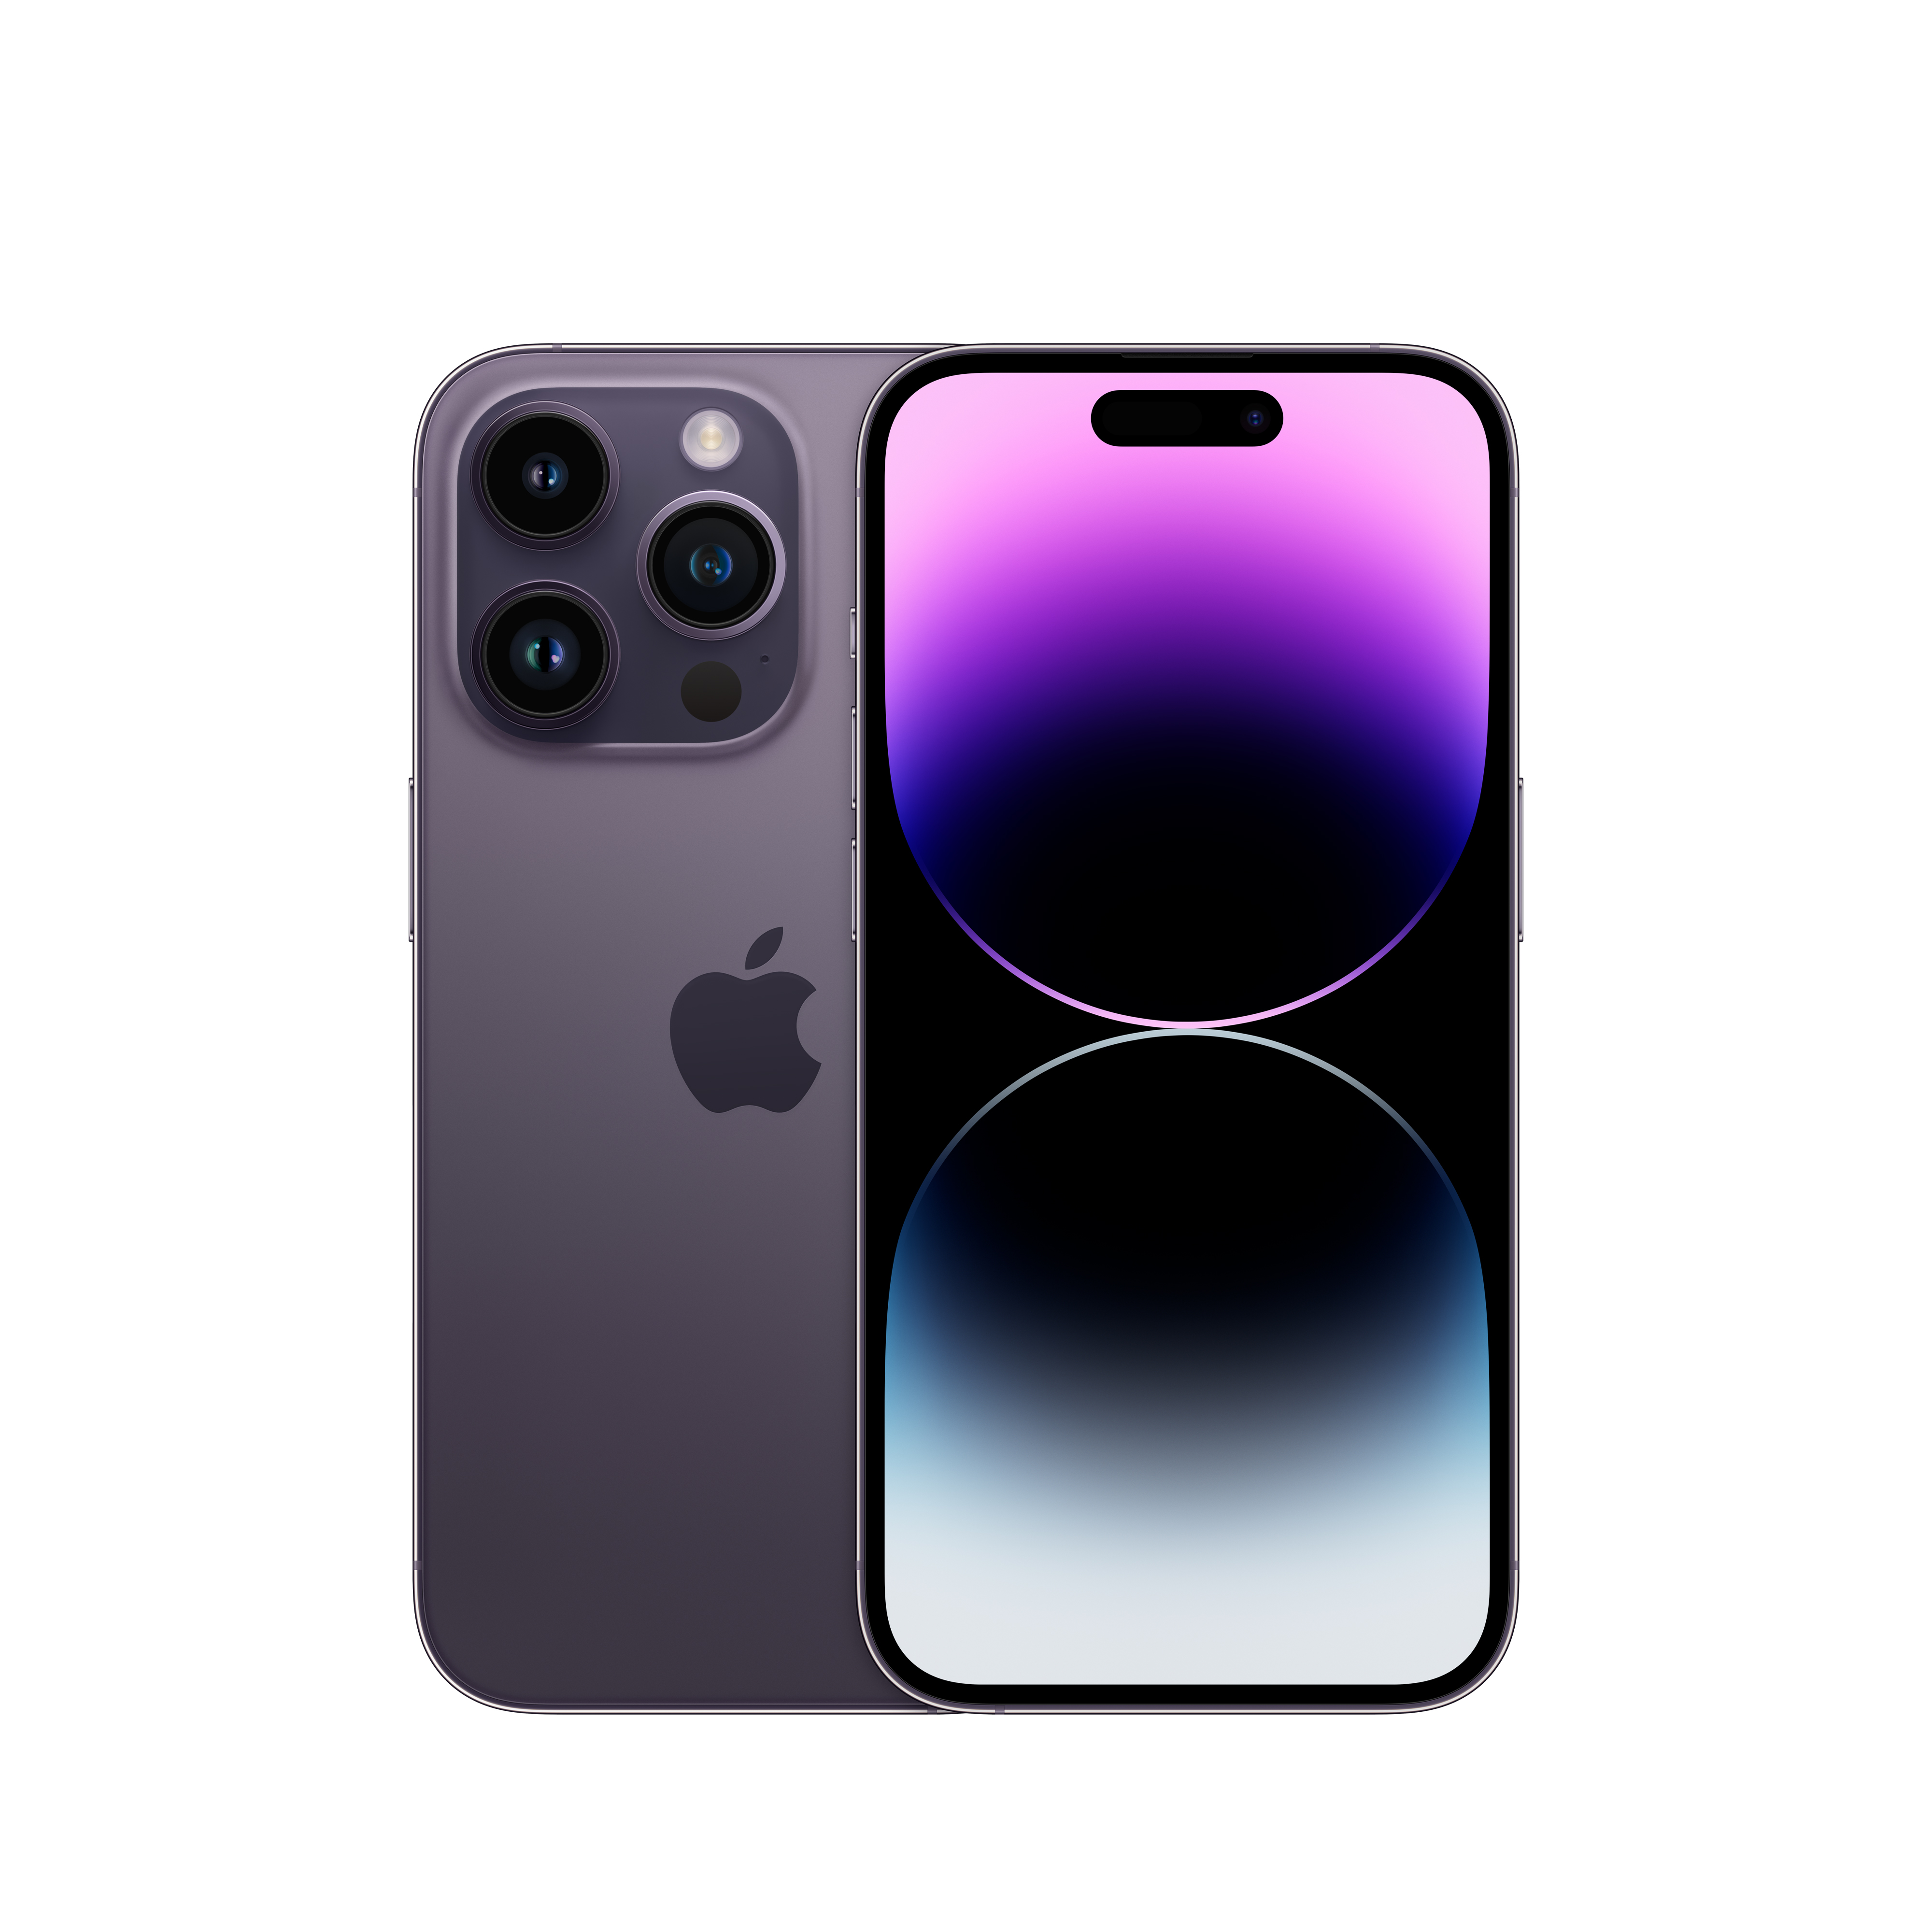 Apple iPhone 14 Pro (MQ0G3HN/A) Deep Purple with 128GB, iOS 16, A15 Bionic chip, 6core CPU with 2 performance, 6.7 inch OLED display